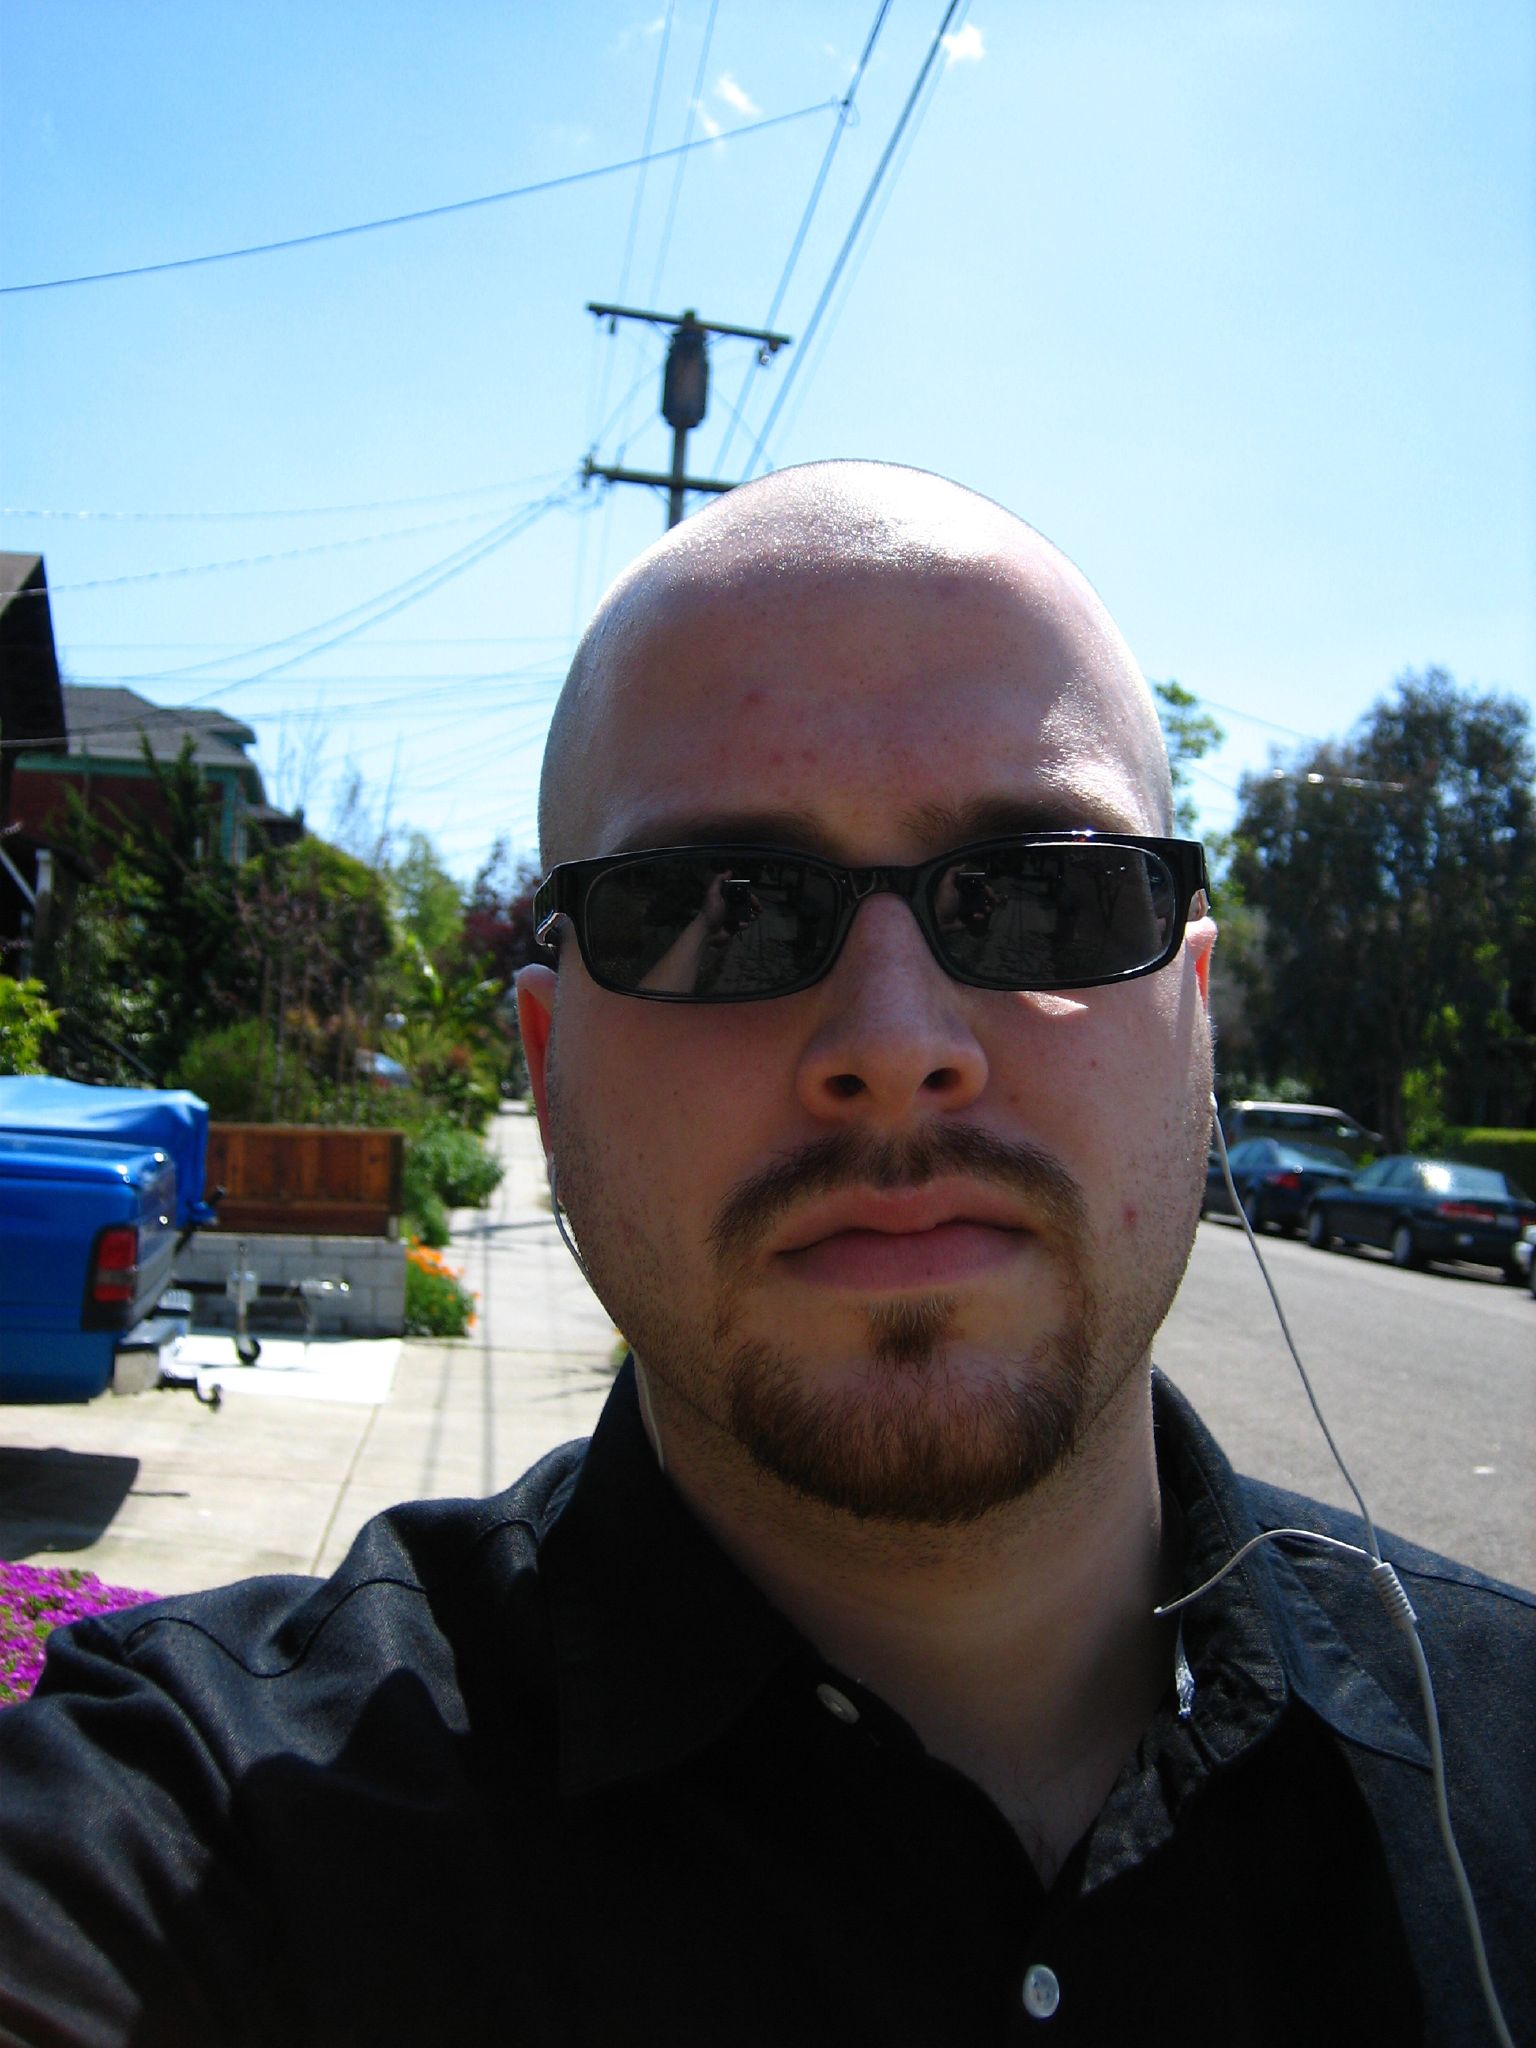 a bald man wearing sunglasses next to a road